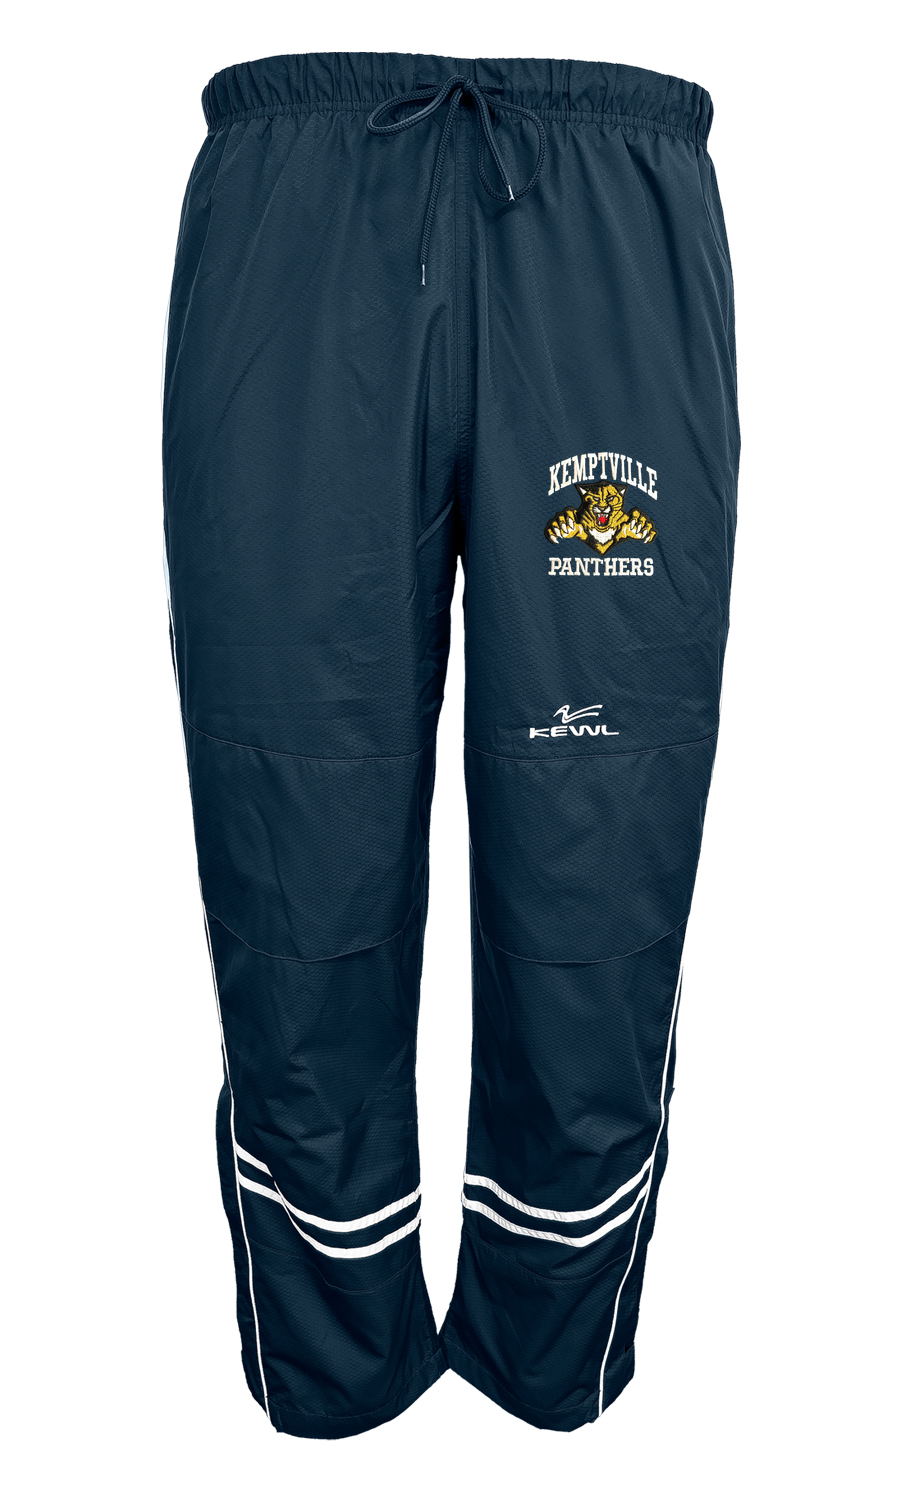 Panthers - Lightweight Pants - Inventory